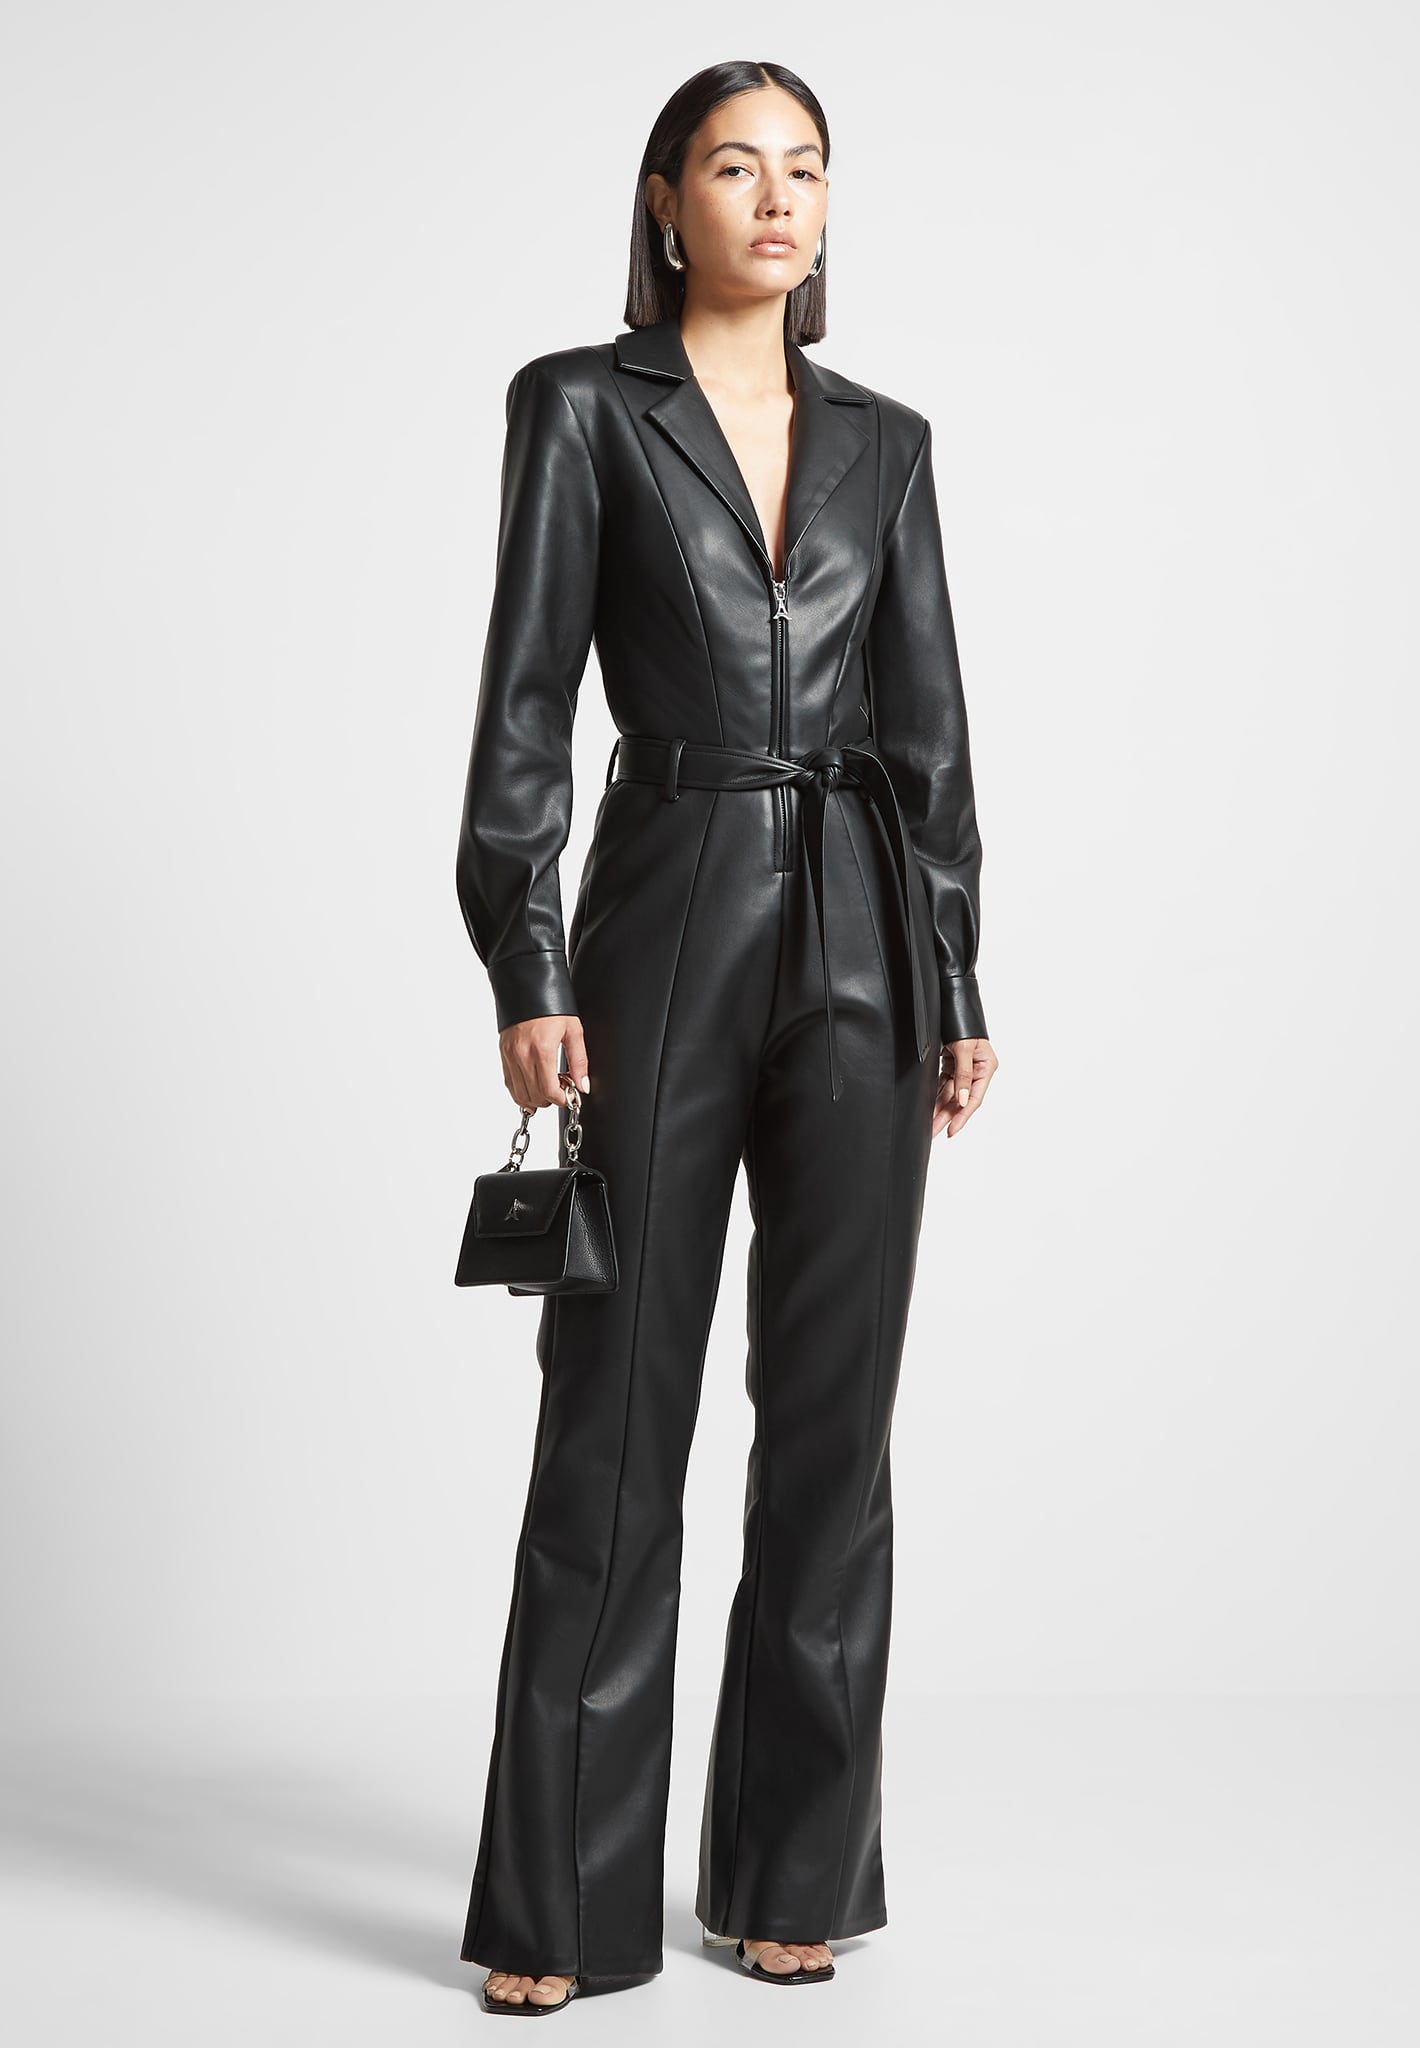 Vegan Leather Fit and Flare Belted Jumpsuit - Black